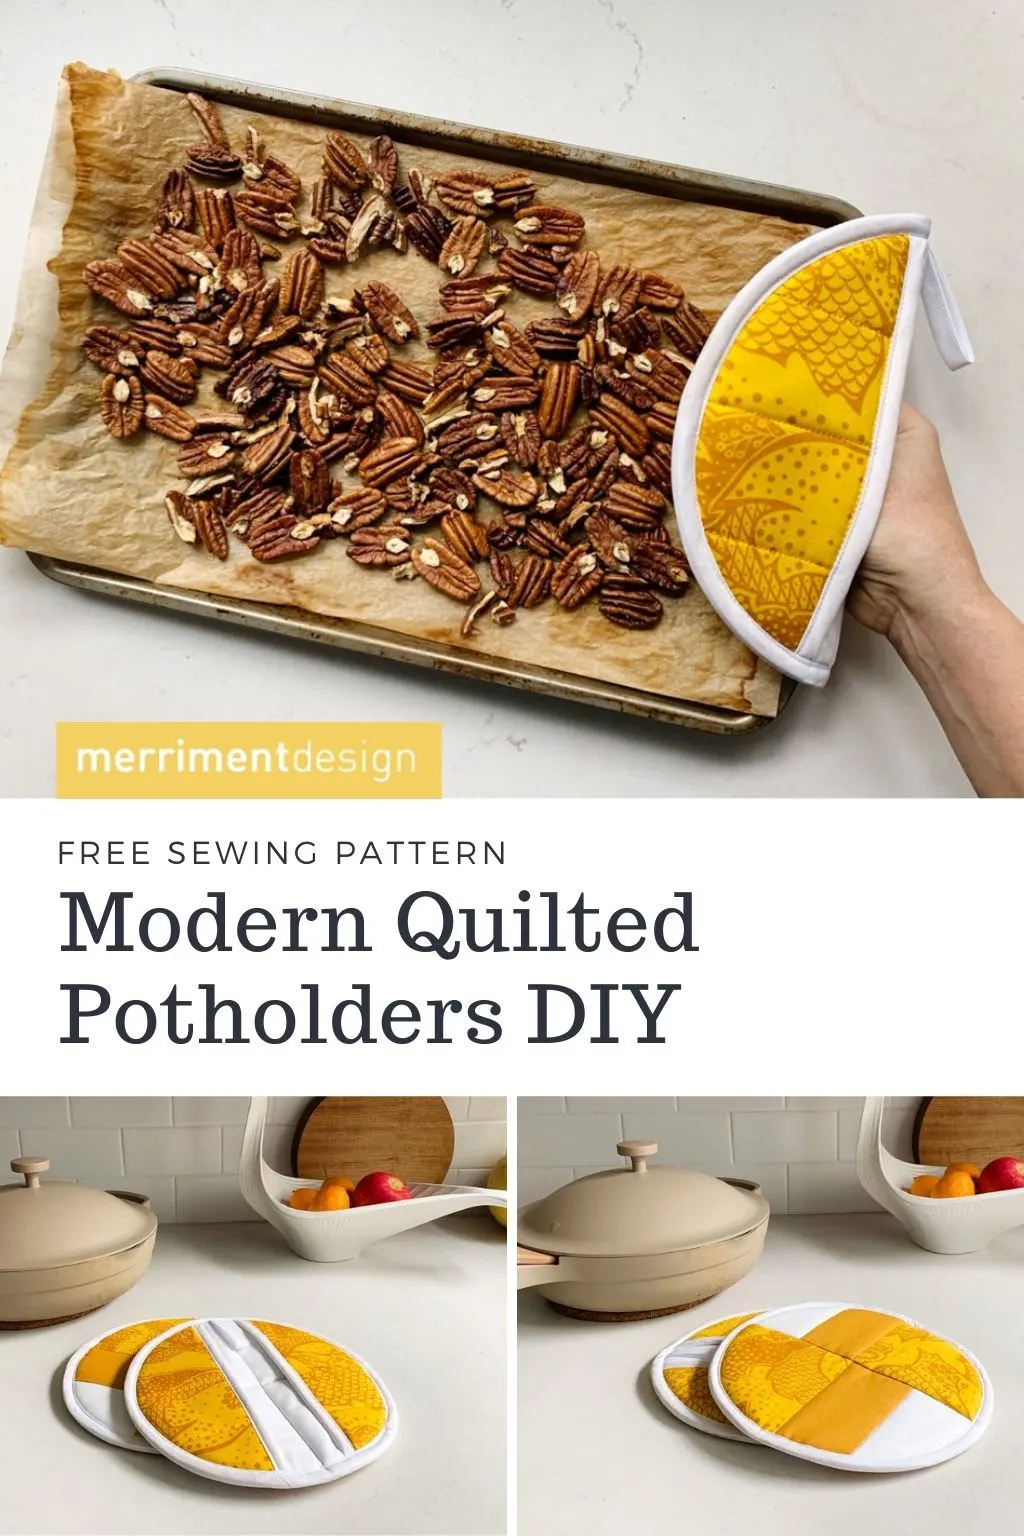 DIY modern quilted potholder tutorial and free sewing pattern